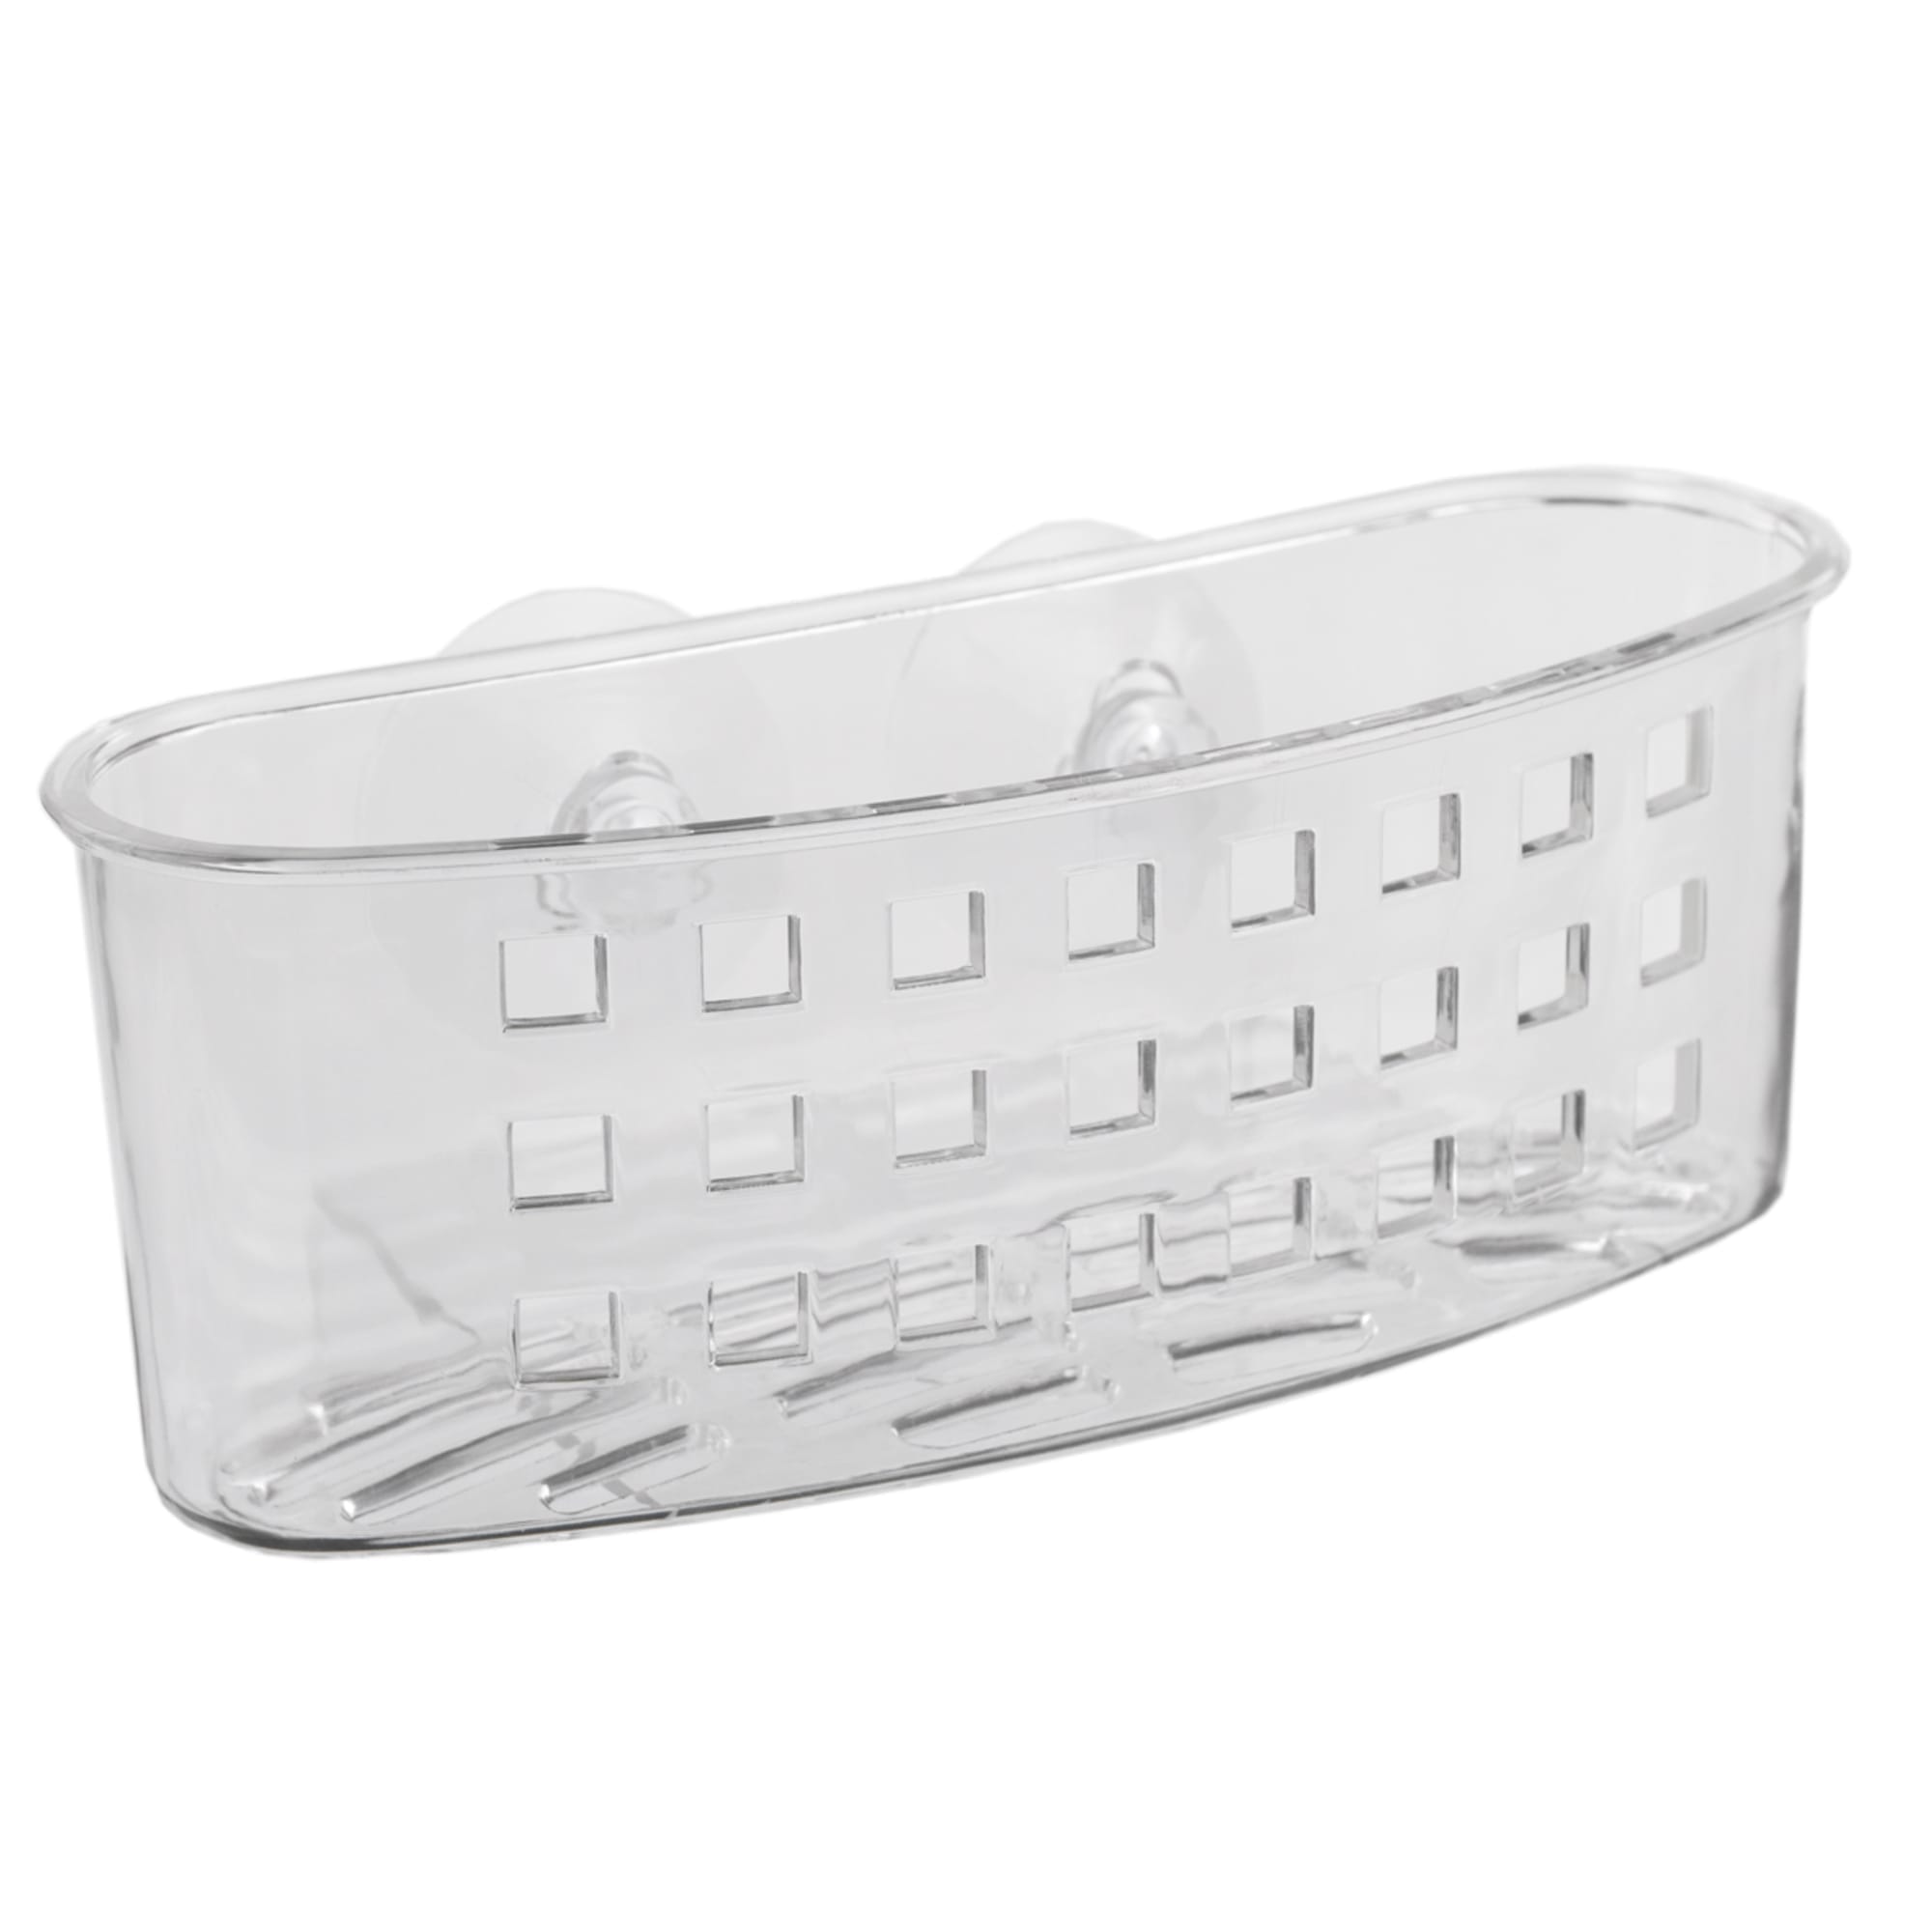 Home Basics Wide Plastic Bath Caddy with Suction Cups, Clear $1.50 EACH, CASE PACK OF 24